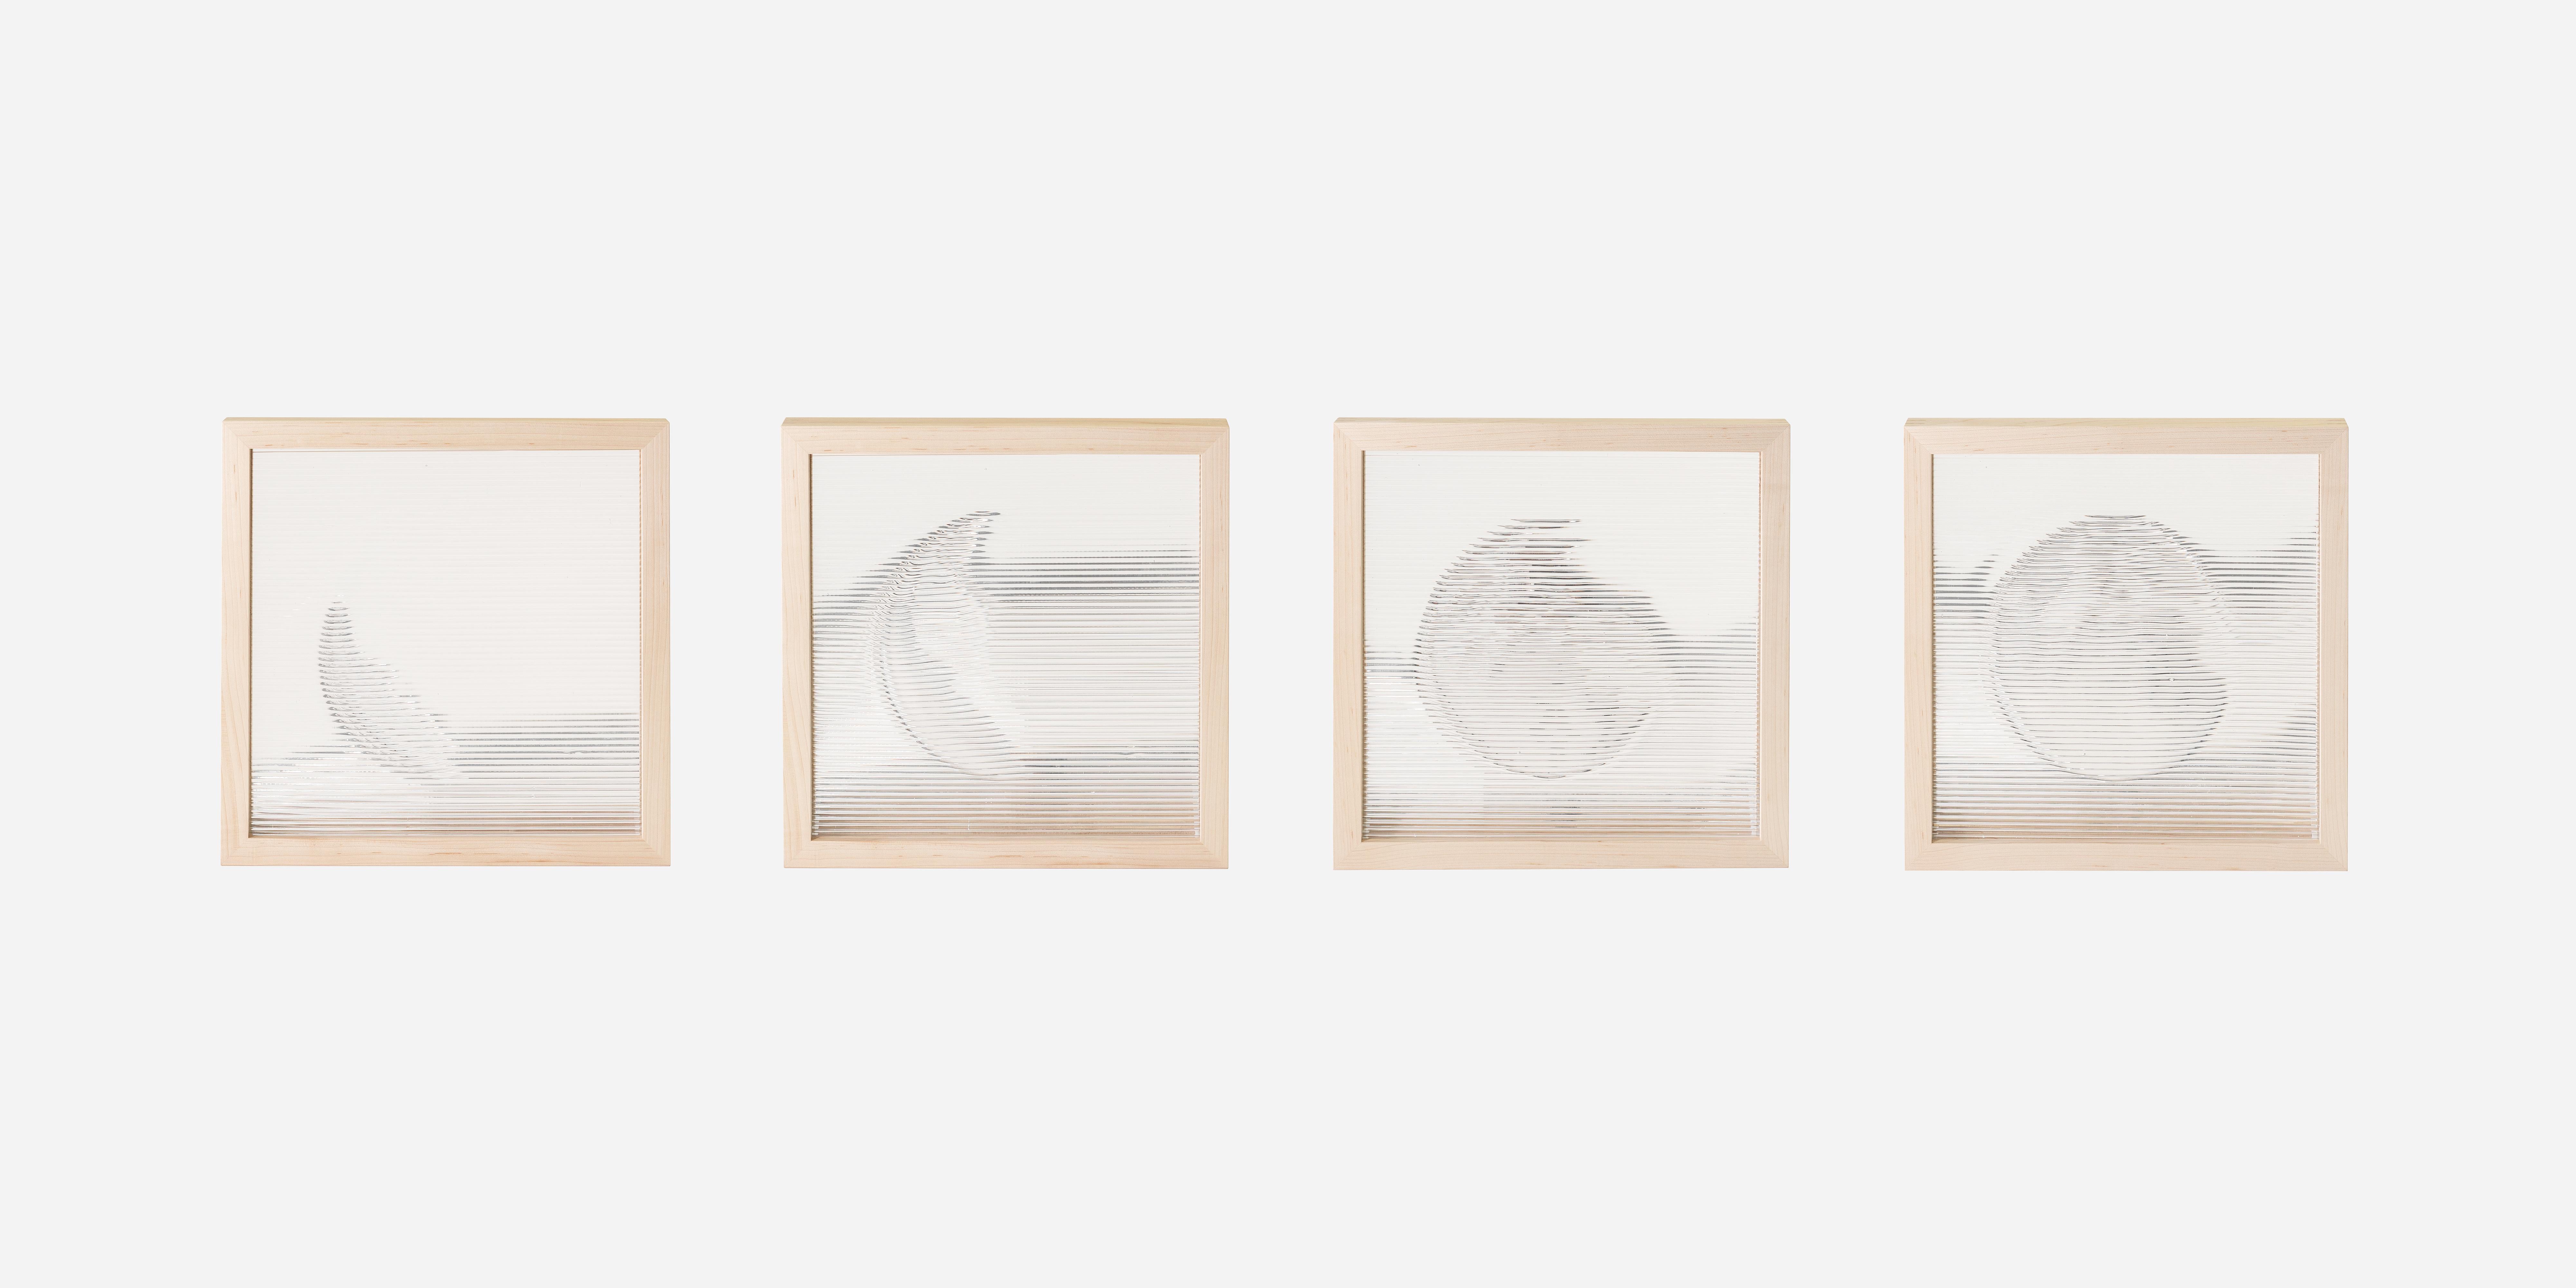 Ethereal in nature the images in these panels appear and disappear. The viewer must orbit the work to first see and then comprehend. This work explores a new way of markmaking in glass. 

Using a novel, artist-developed process, gray-scale images